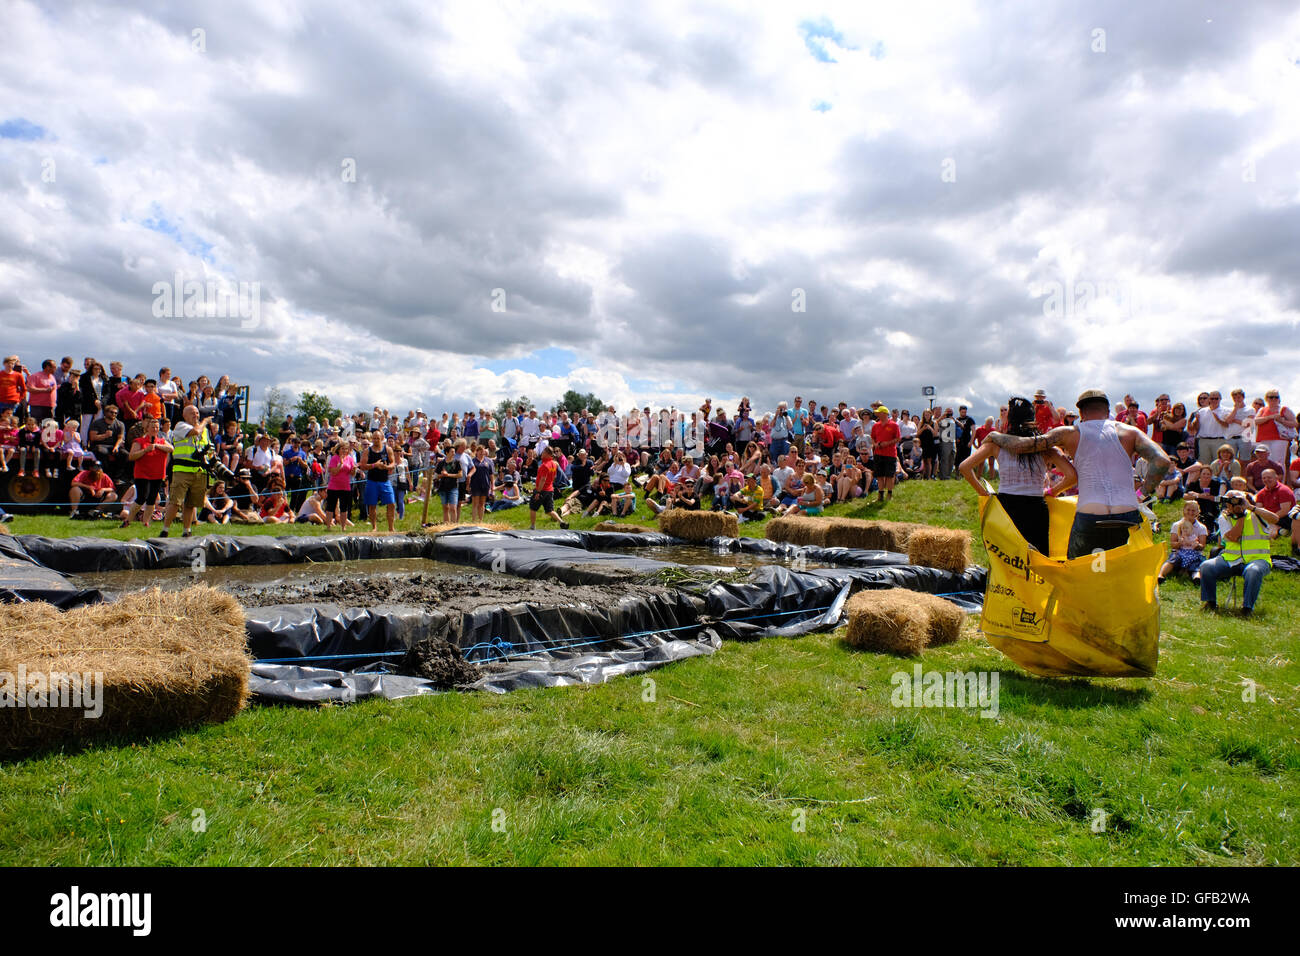 Lowland Games, Thorney, Somerset, UK, 31 July 2016: Competitors take part in the annual Lowland Games  “Wife Carrying” race in Somerset. Hundreds turned out in the heat to watch the Lowland Games which includes such events as a Raft Race, Hay Bale Racing , River its a Knock Out, Mud Wrestling, and Chunder Challenge. The games, originally started in 1984, are held annually in the Lowland village of Thorney . Stock Photo